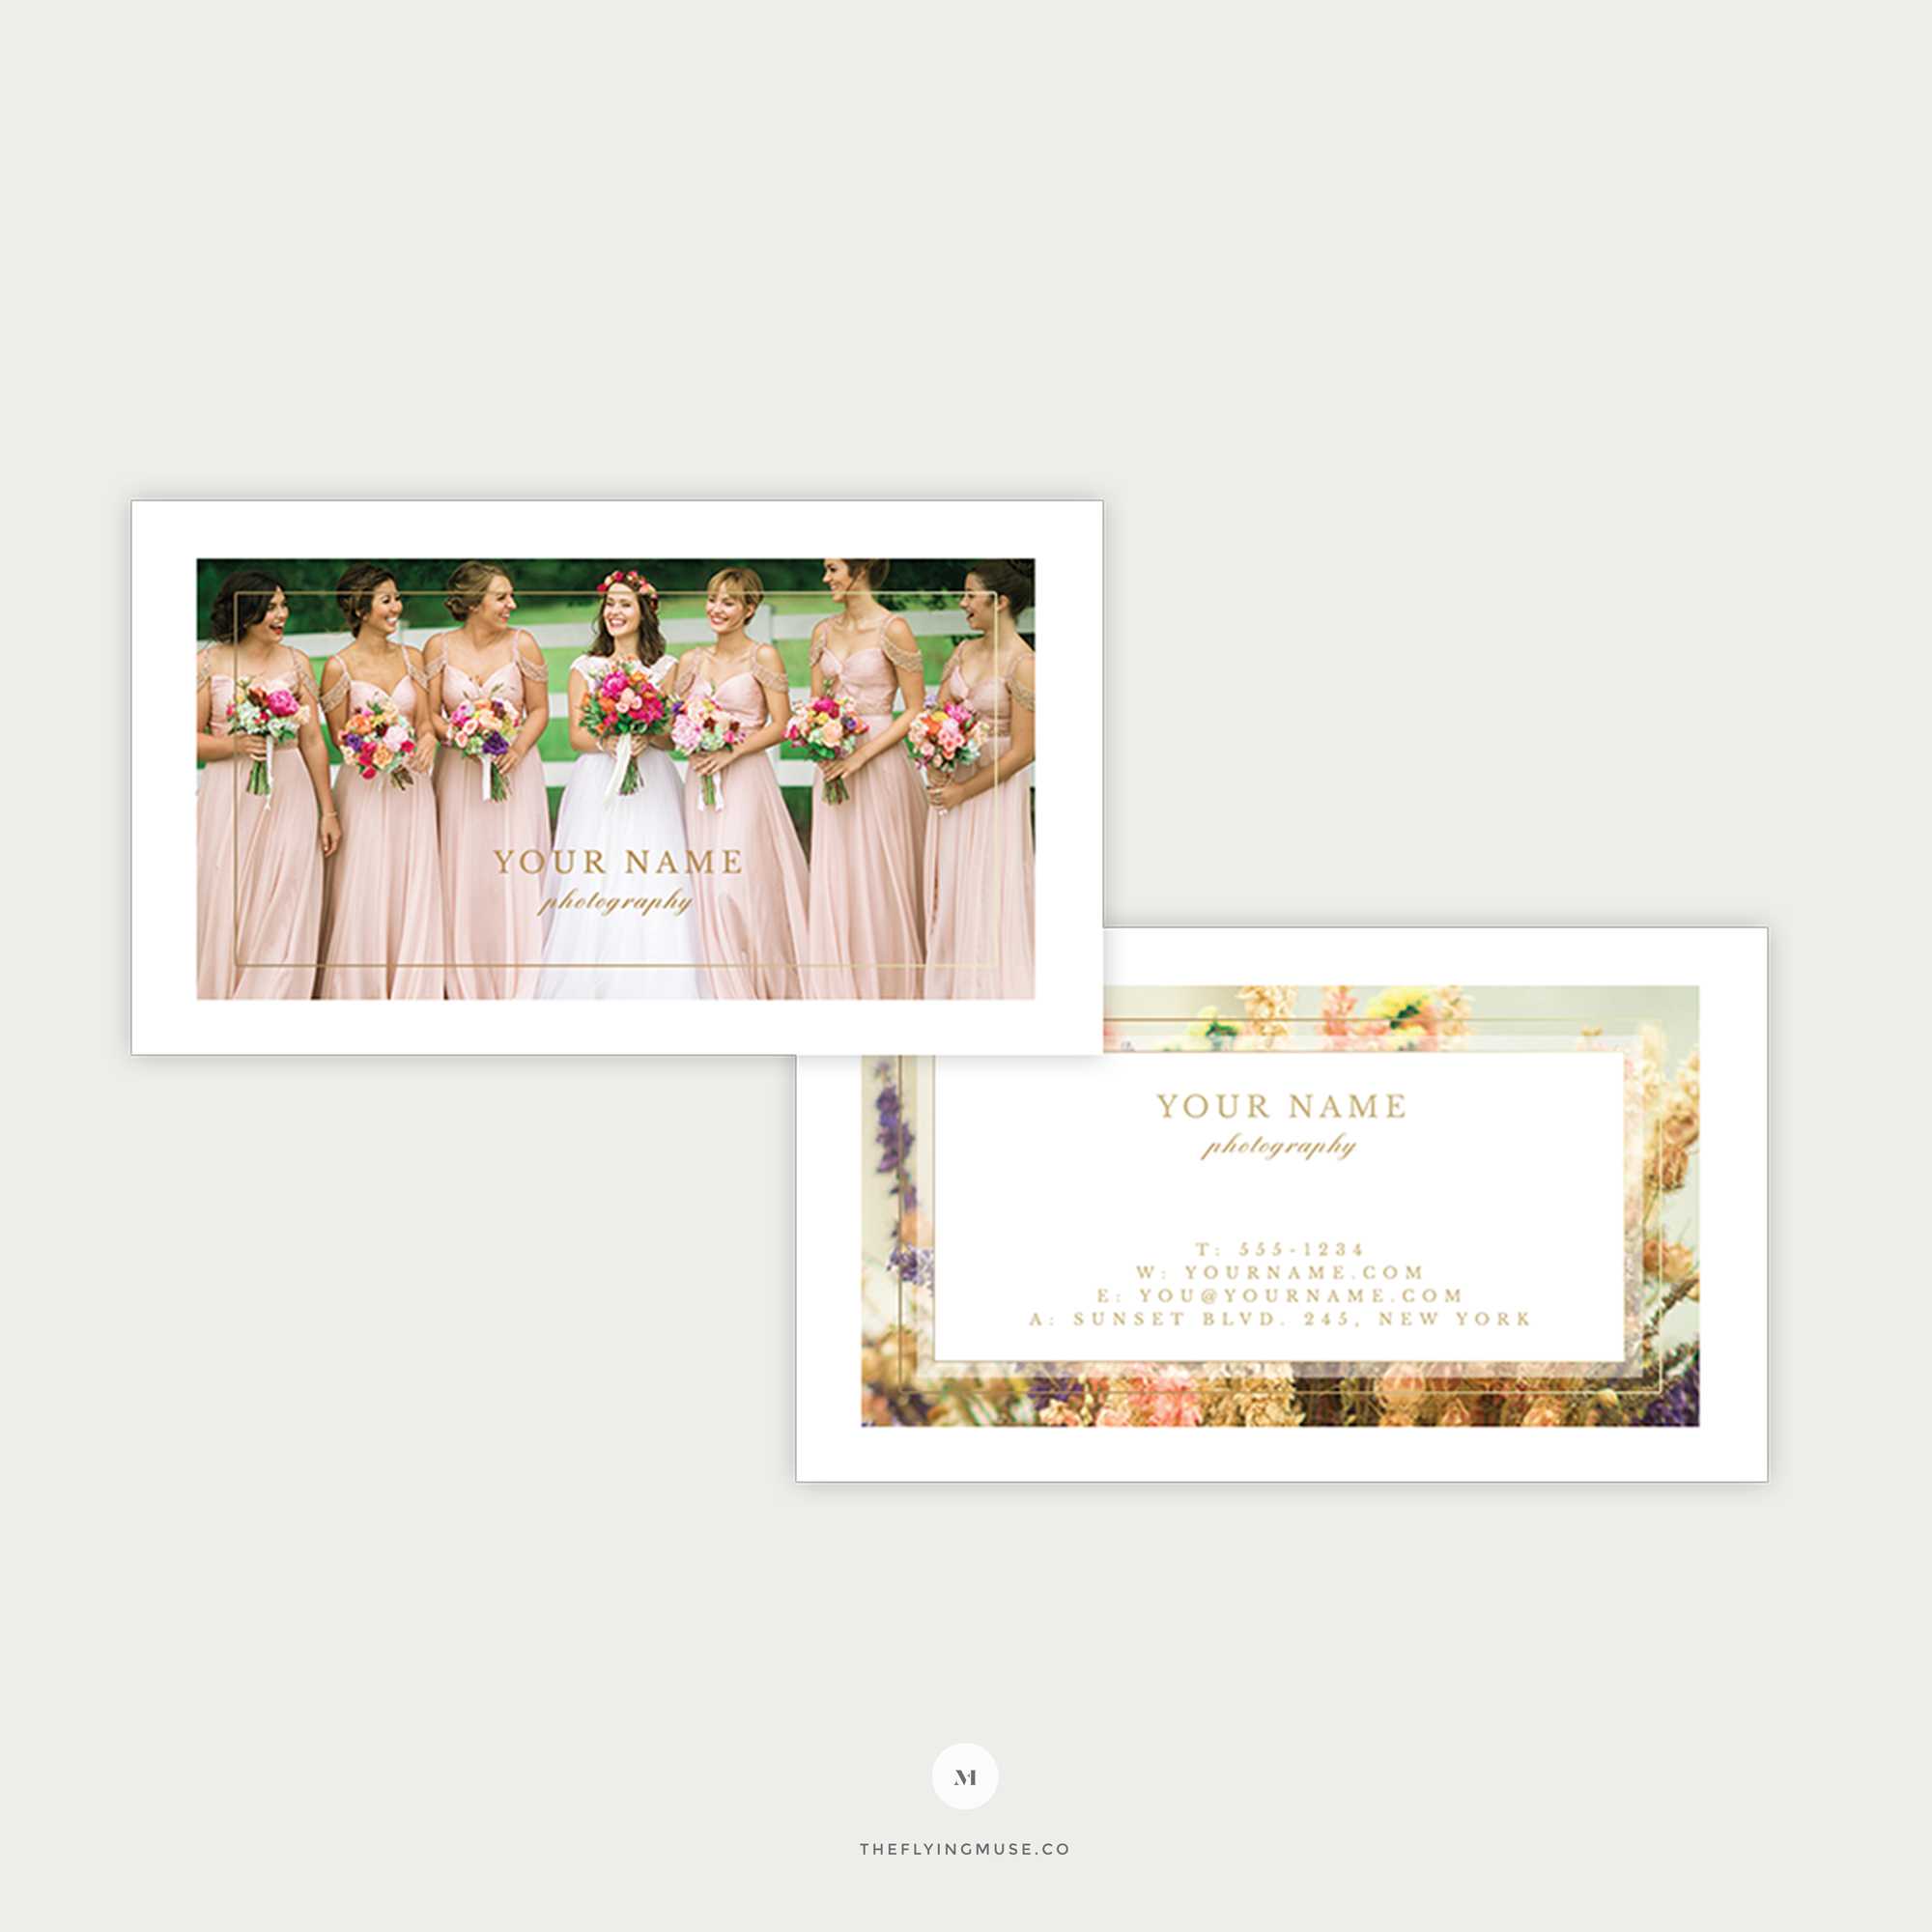 Elegant Wedding Photography Business Card Template | The Flying Muse Within Photography Referral Card Templates